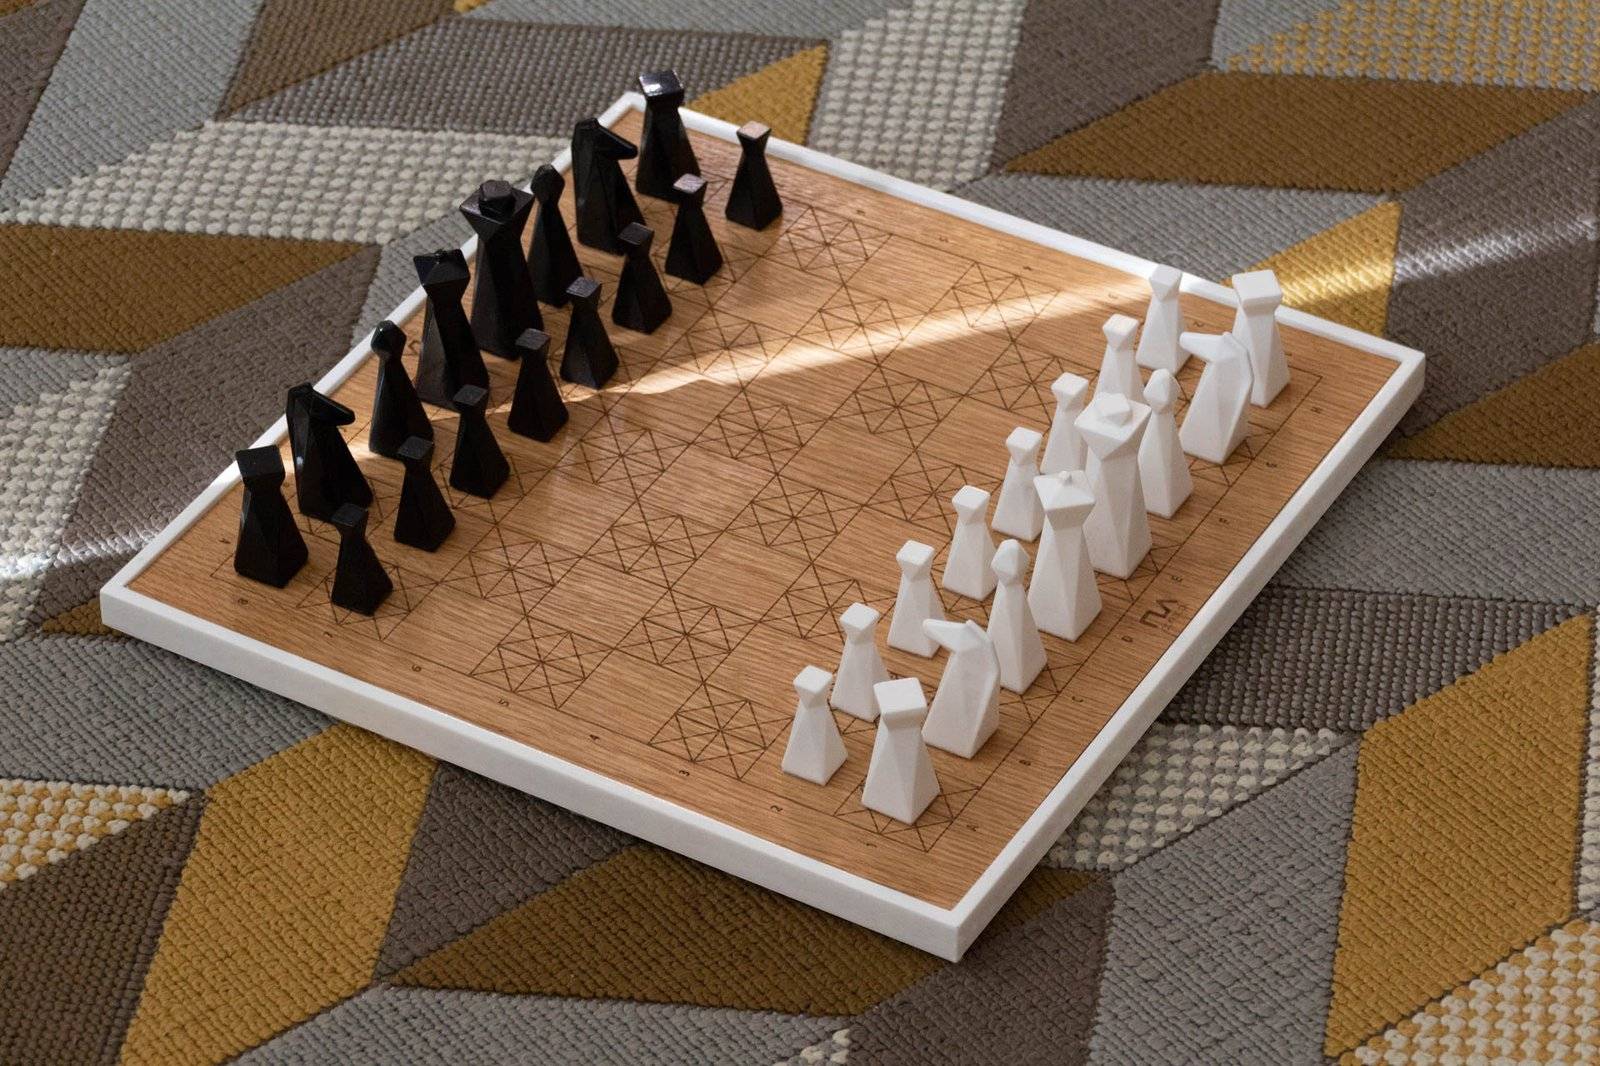 Handmade chess board in black and white lacquered wood